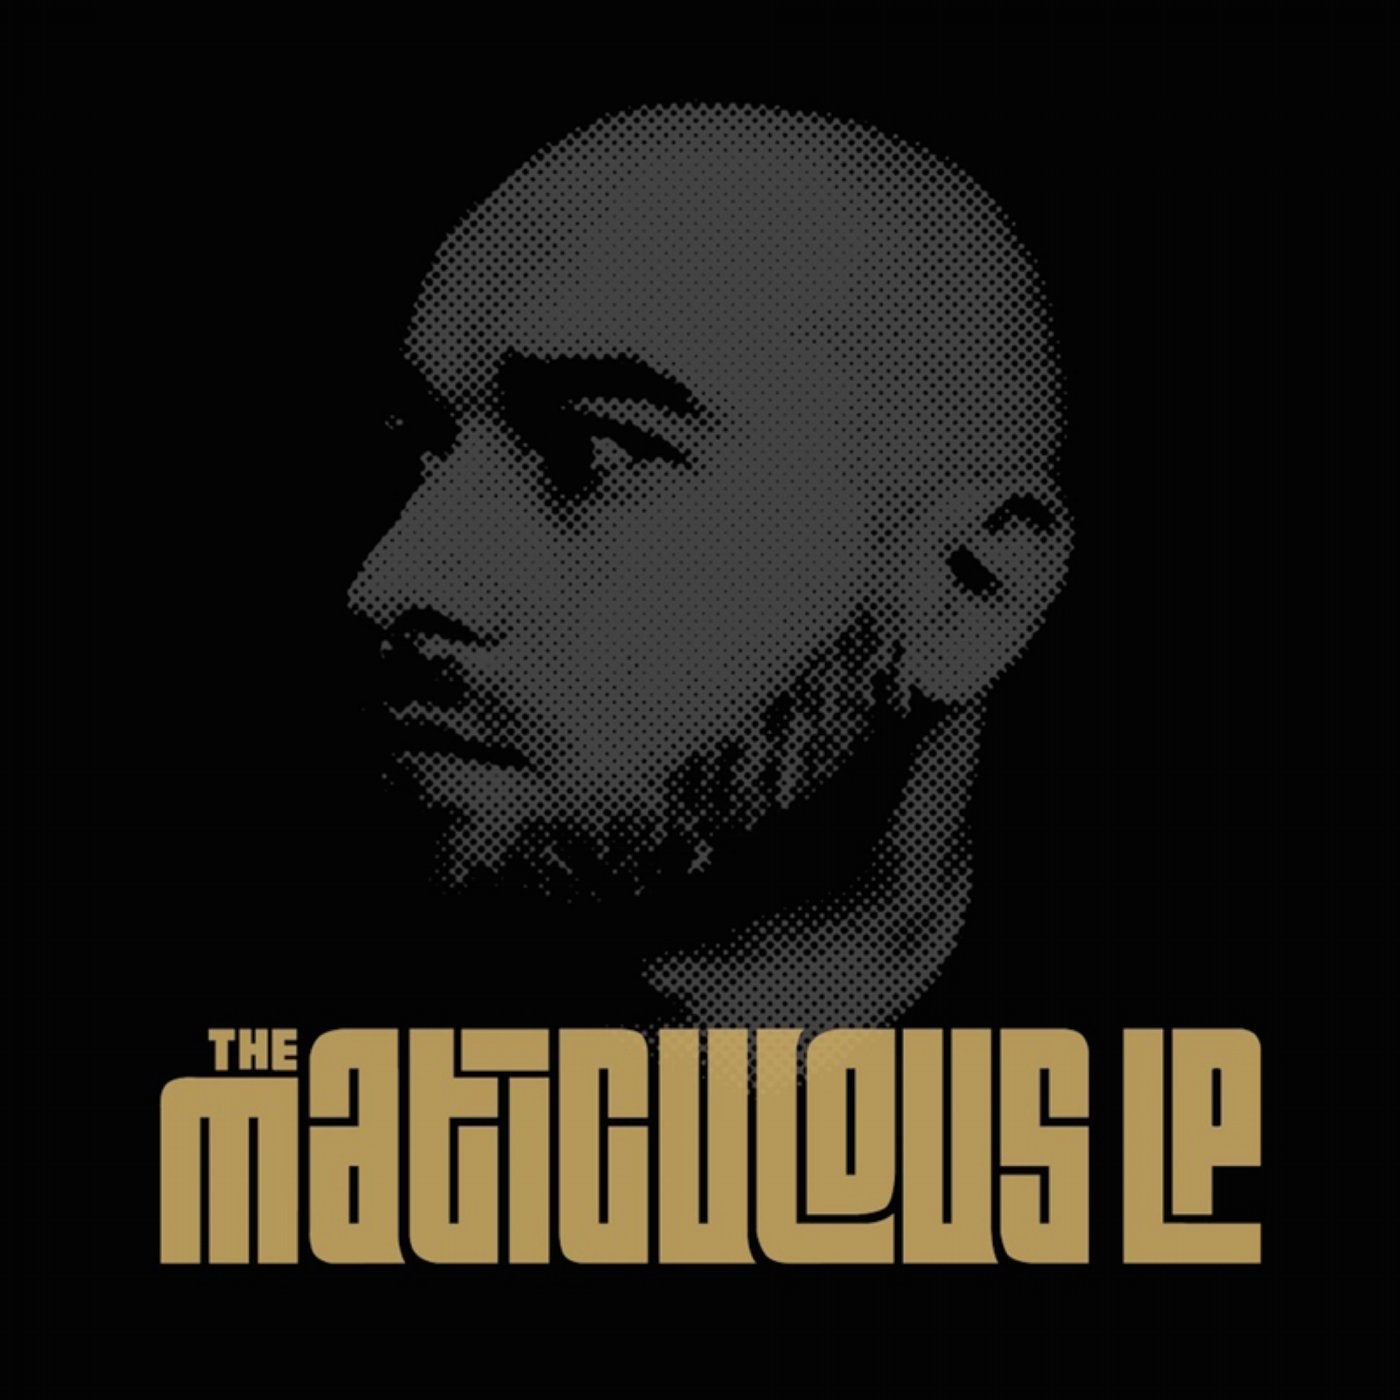 The maticulous LP